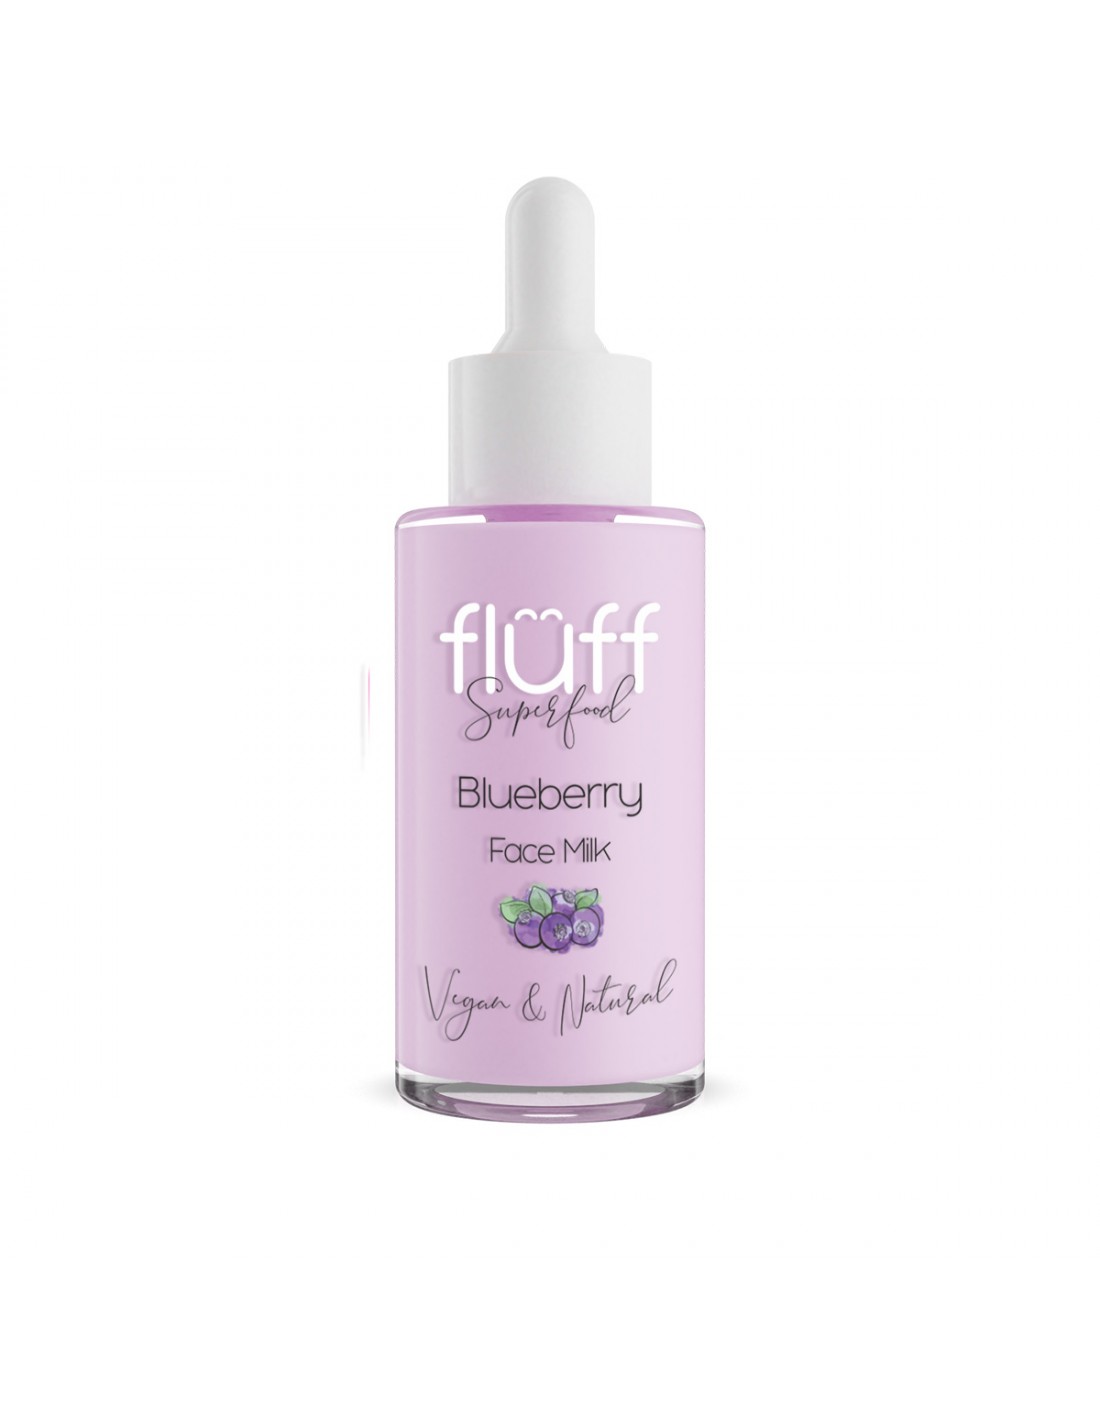 2325-thickbox_default-Fluff-Blueberry-Soothing-Face-Milk-40ml